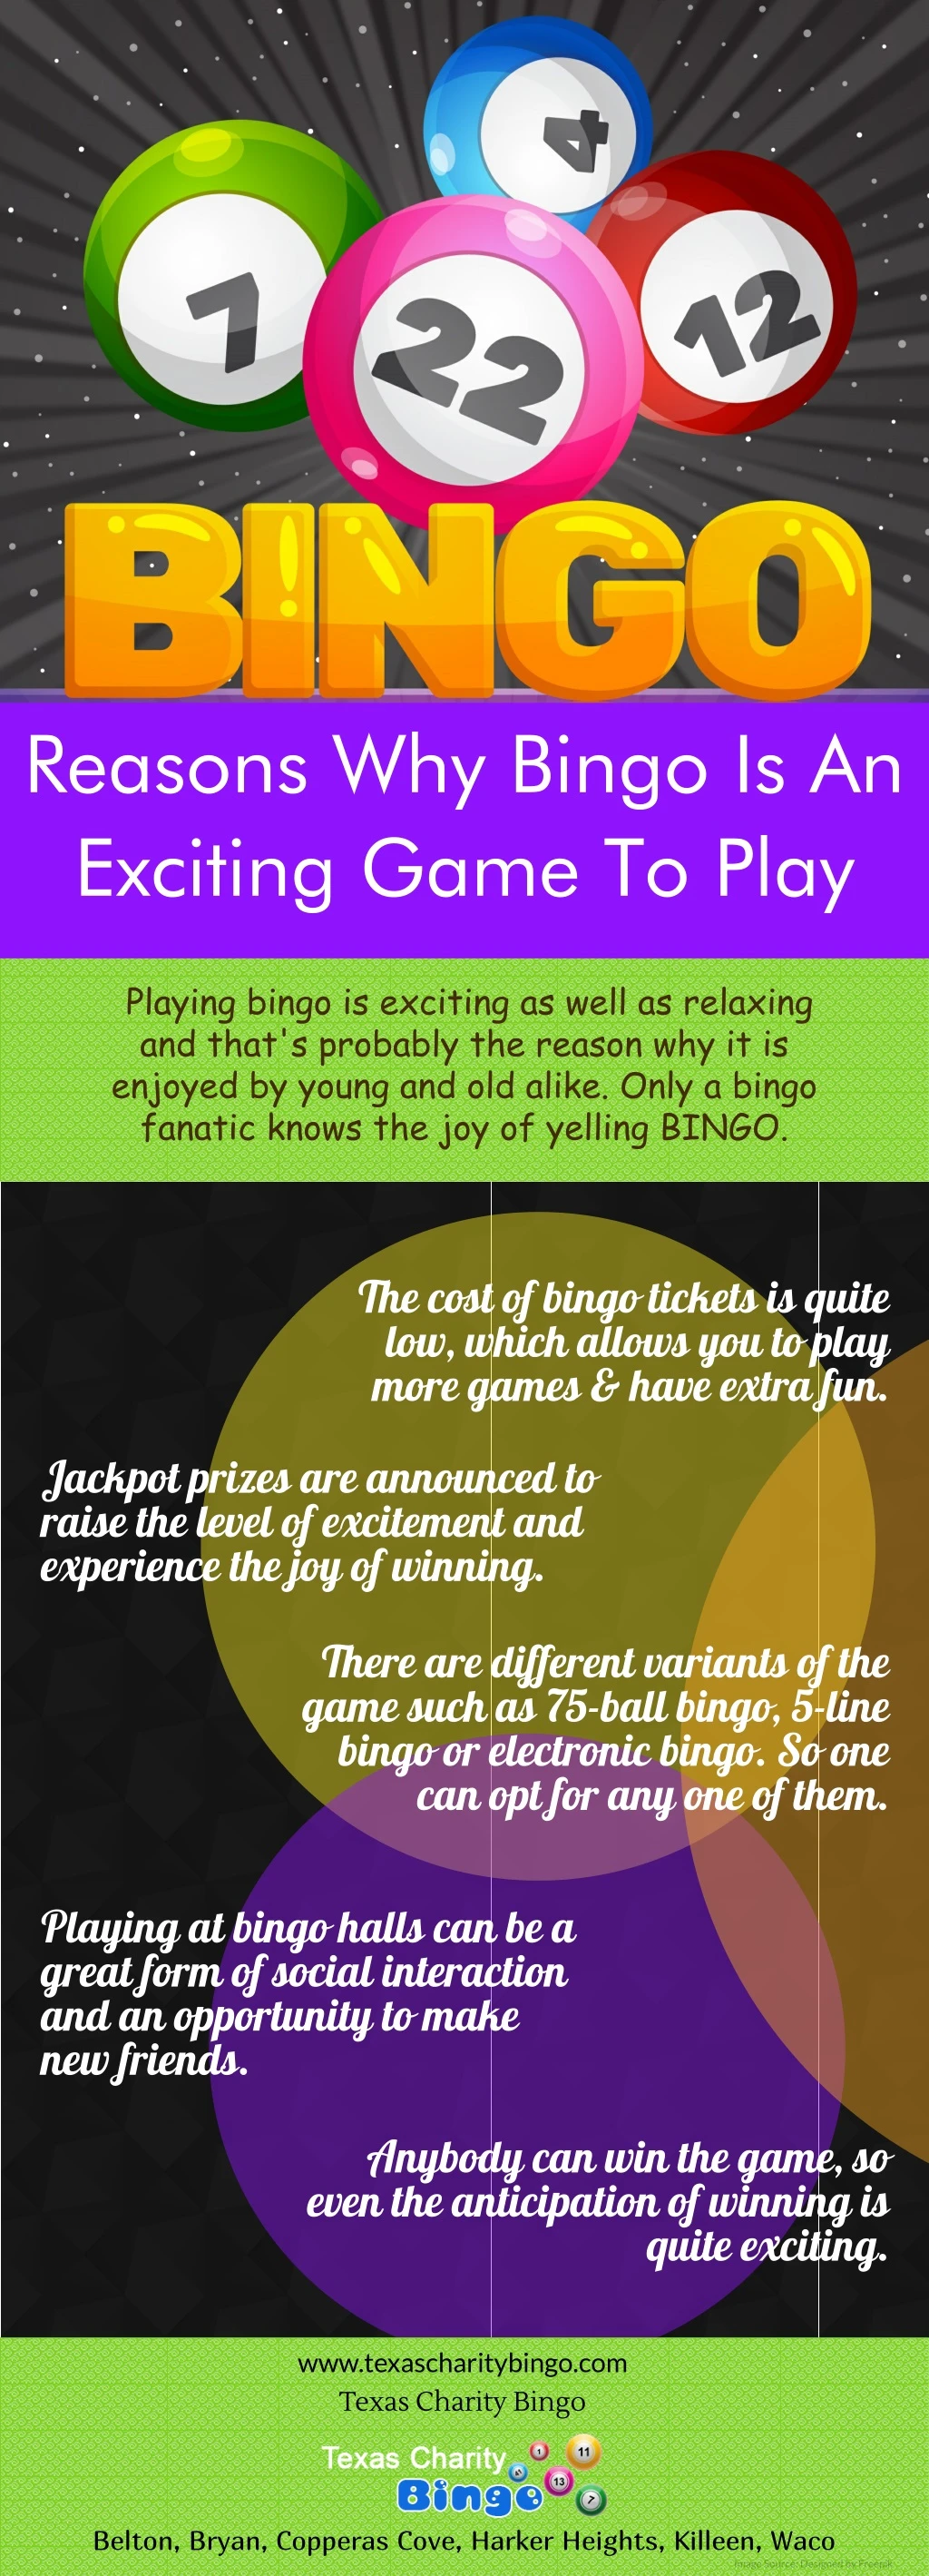 reasons why bingo is an exciting game to play